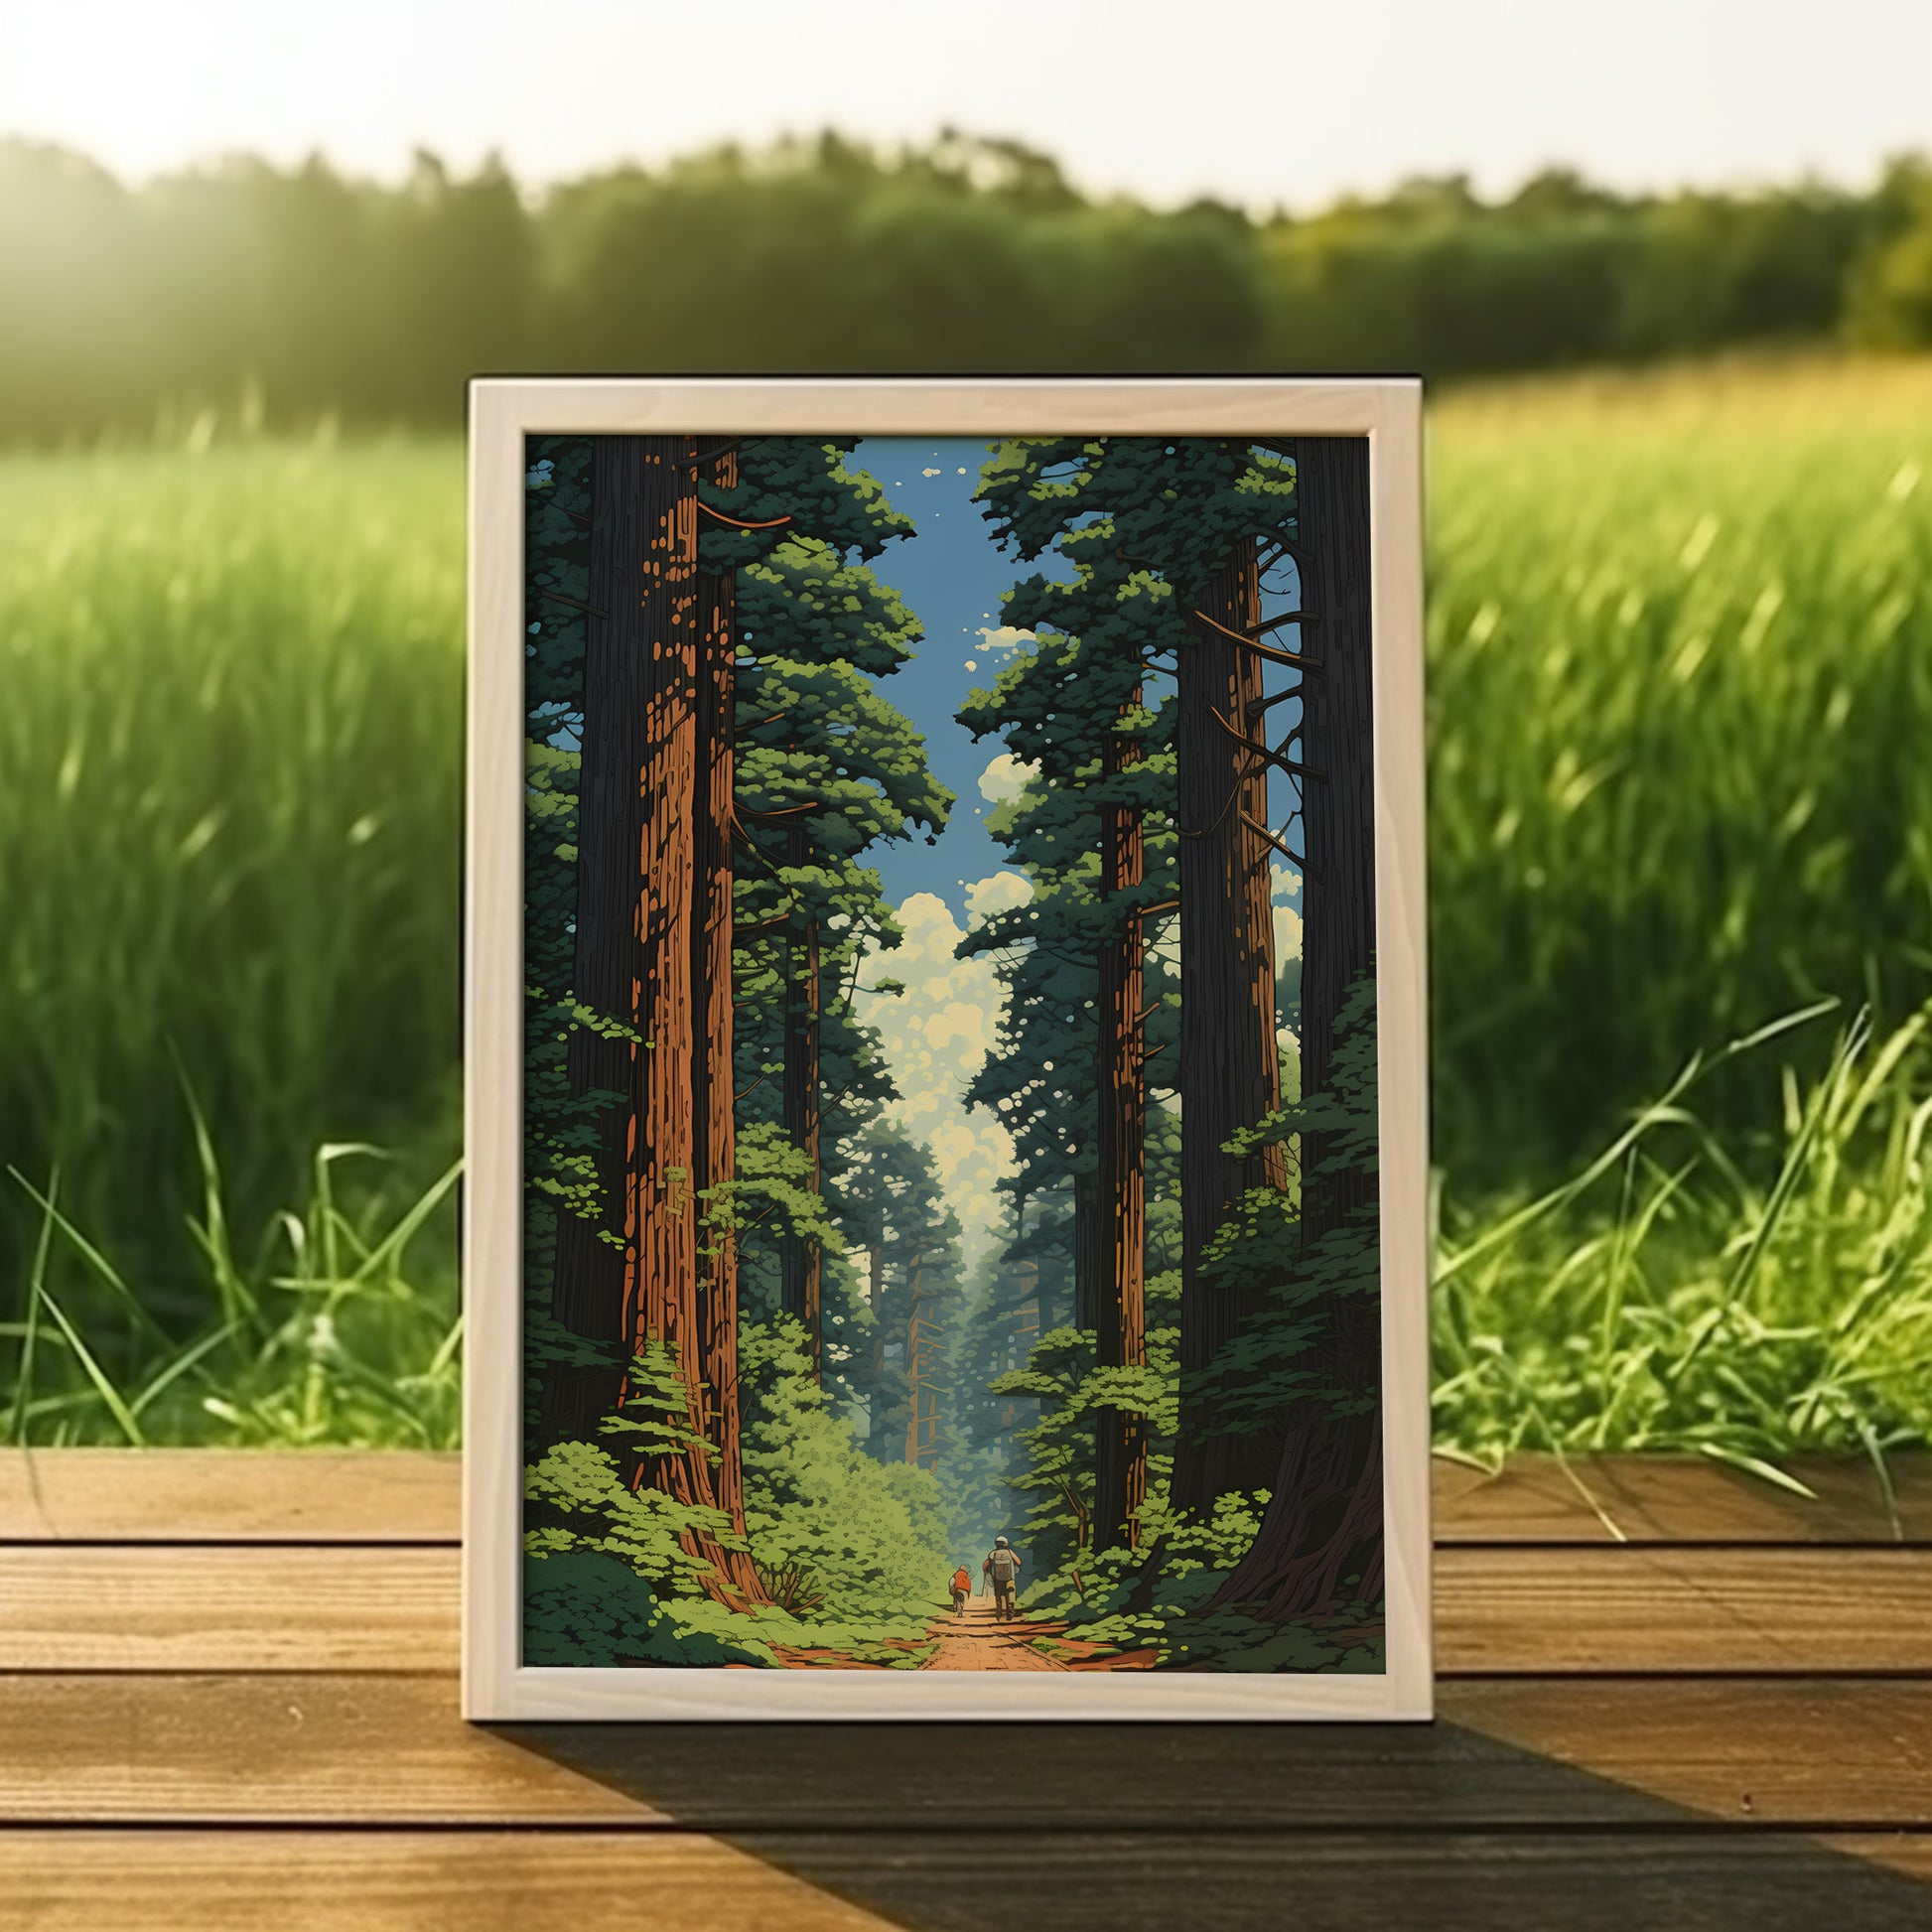 Framed illustration of a forest scene placed on a wooden surface outdoors.